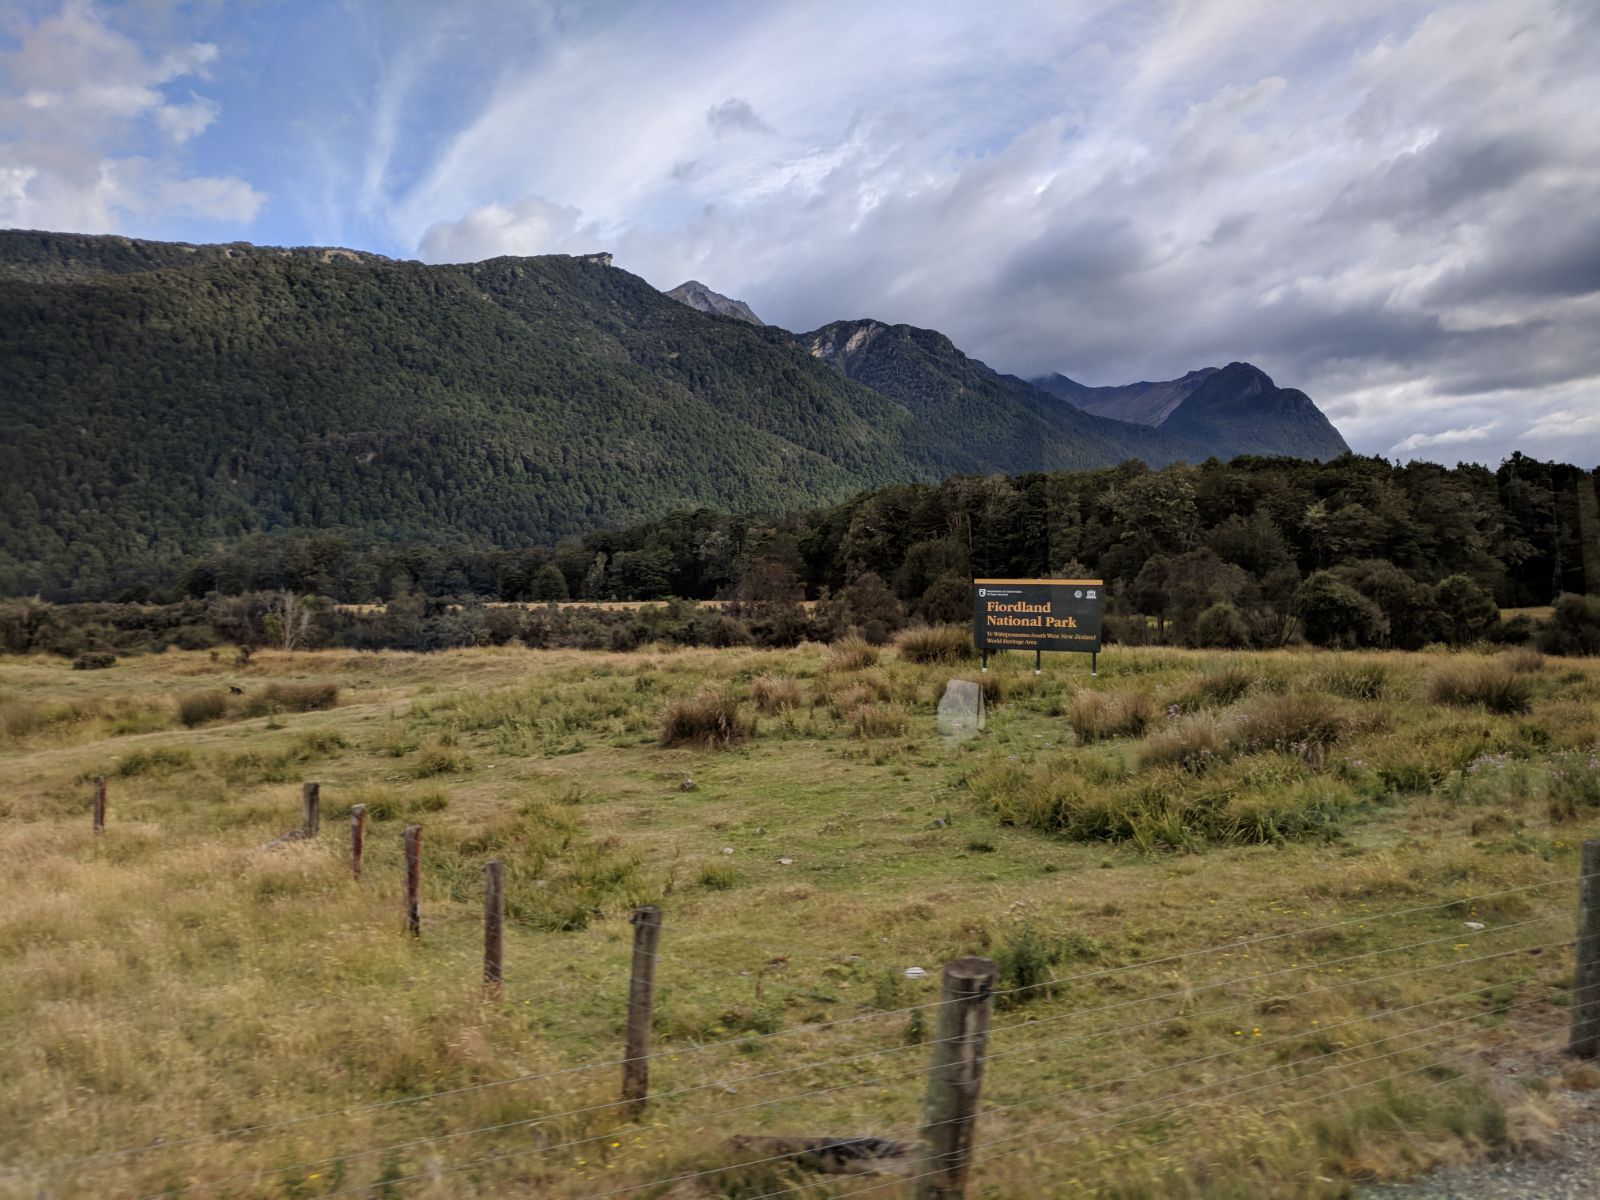 156--after leaving Te Anau, entered Fiordland National Park